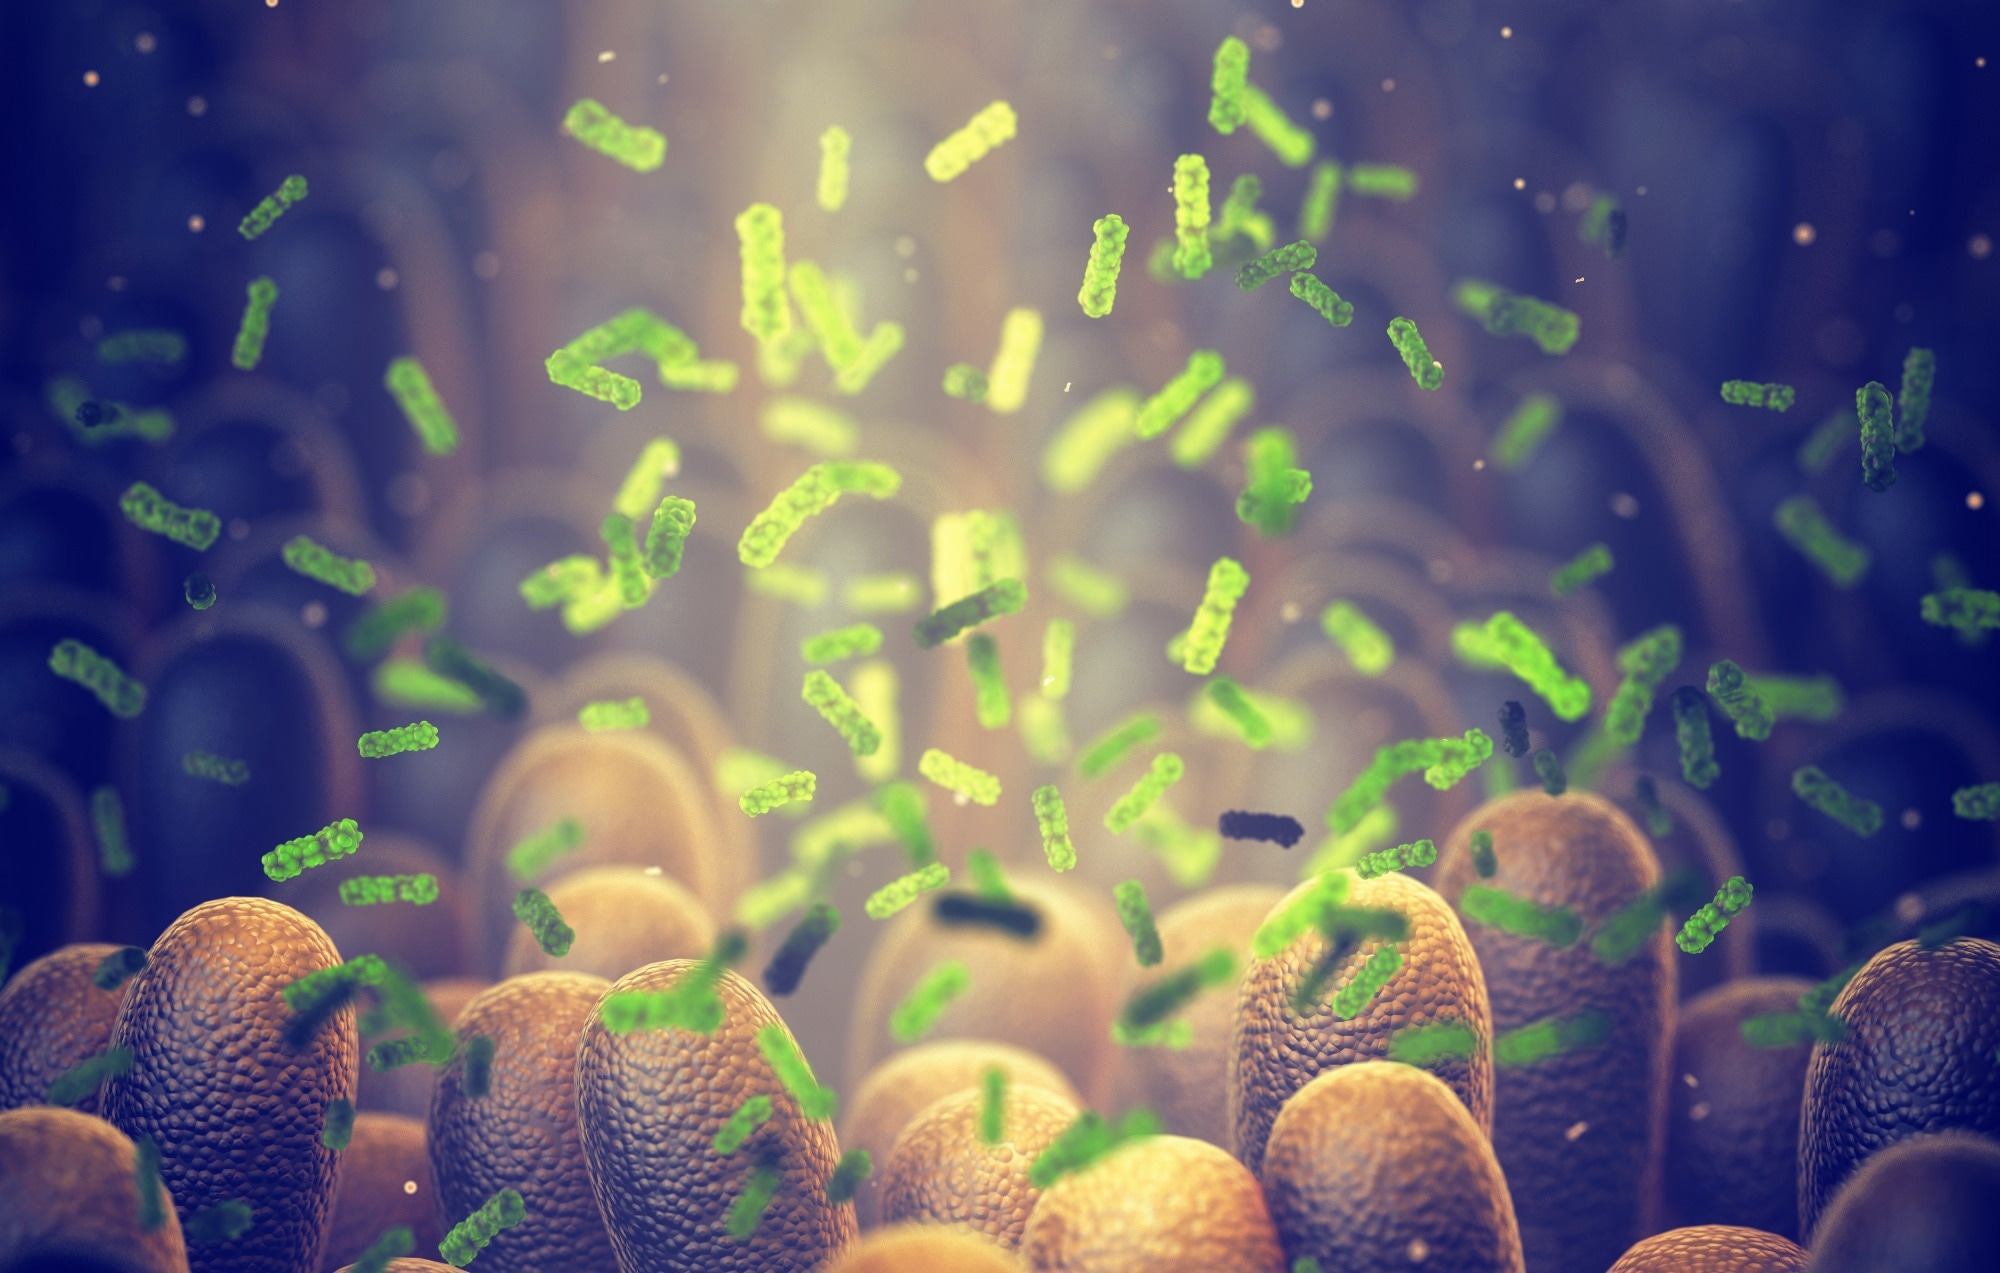 Study: Dysbiosis of a microbiota–immune metasystem in critical illness is associated with nosocomial infections. Image Credit: nobeastsofierce / Shutterstock